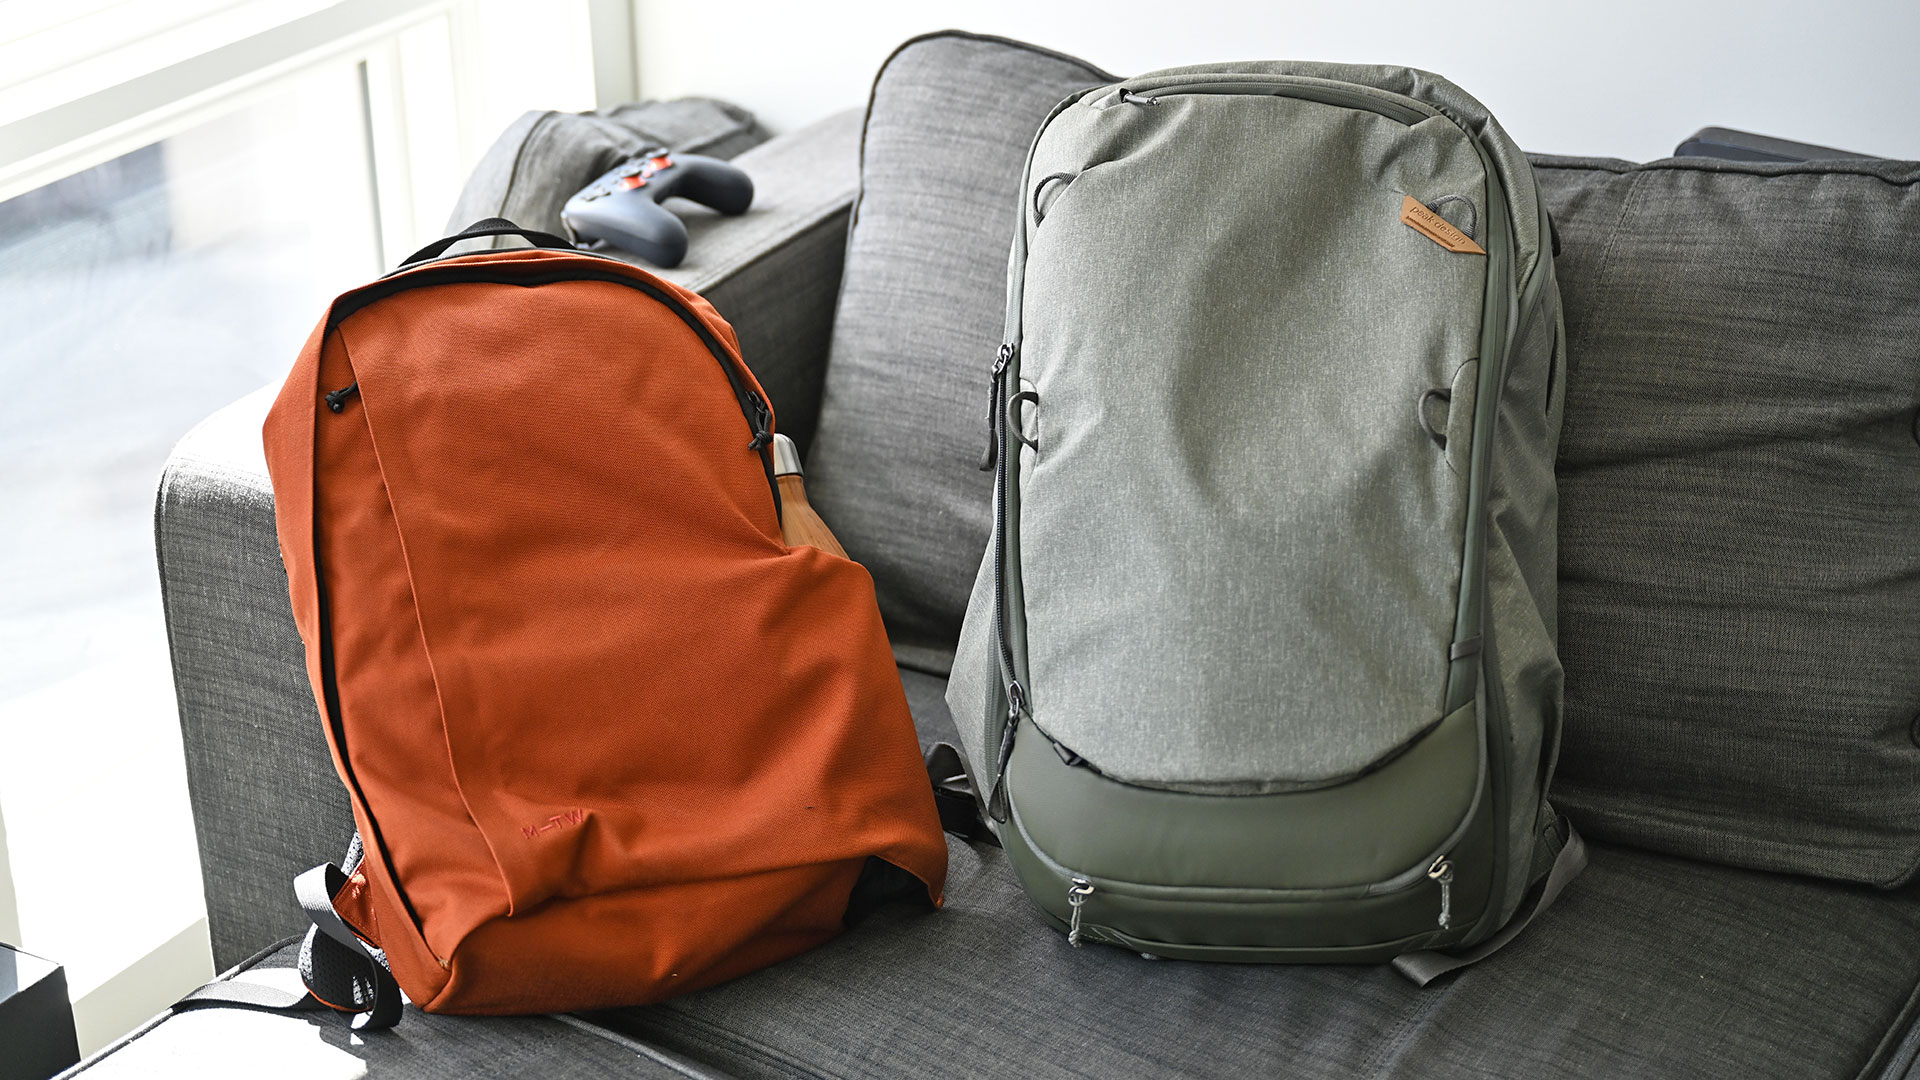 Here is a size comparison of the 21 litre version of the MTW Backpack next to my much larger 45 litre Peak Design Travel Backpack, which I really like, but is a bit too big to use on a daily basis.  (Photo: Sam Rutherford/Gizmodo)